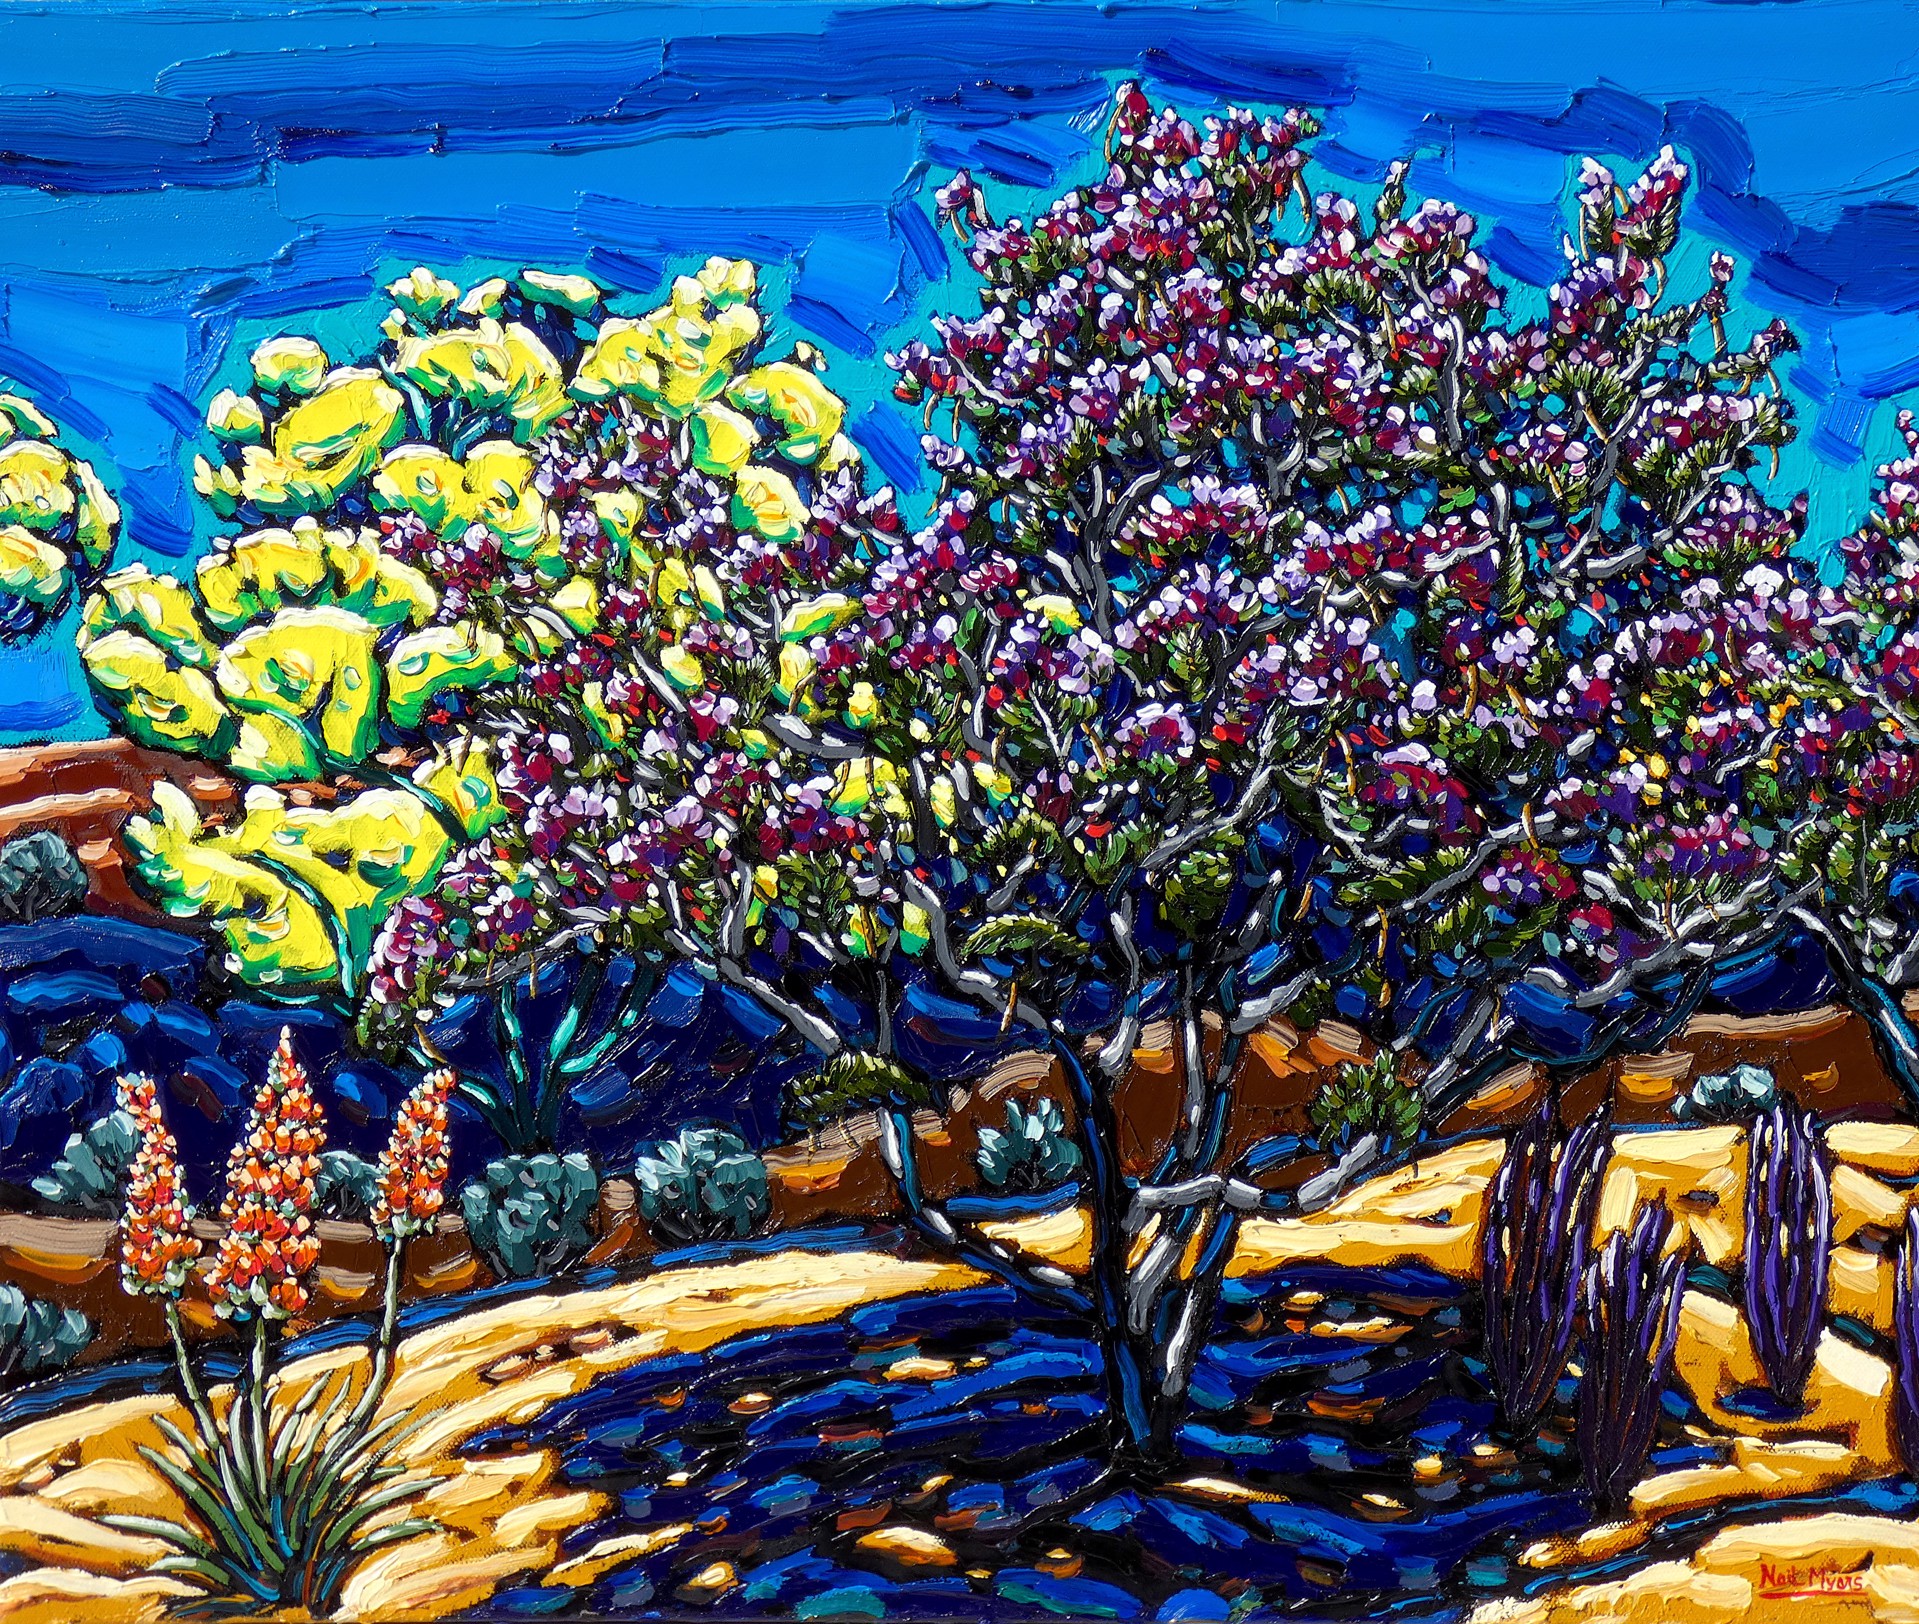 Desert Willow and Paloverde by Neil Myers